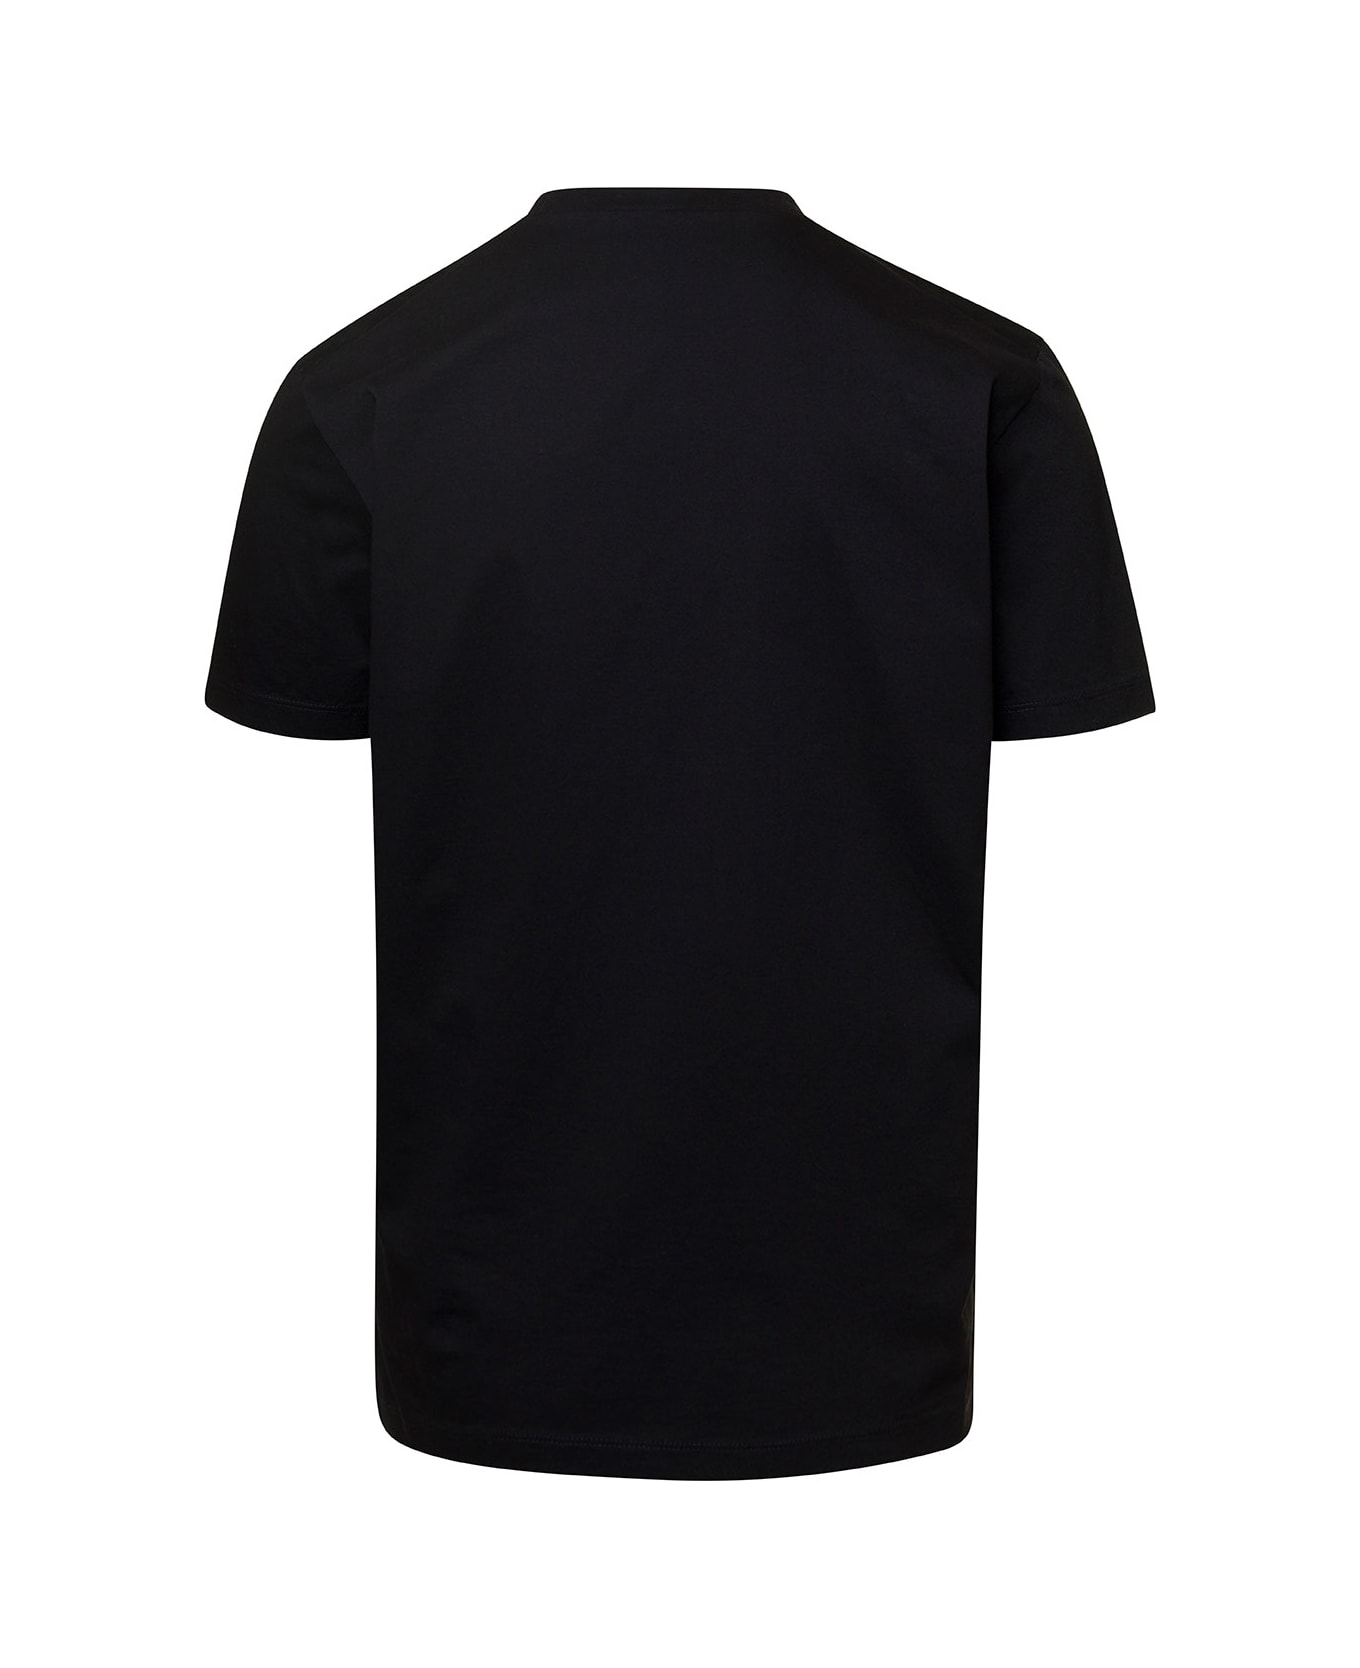 Dsquared2 Black Crewneck T-shirt With D2 Surf Beach Logo On The Chest In Cotton Man - Black